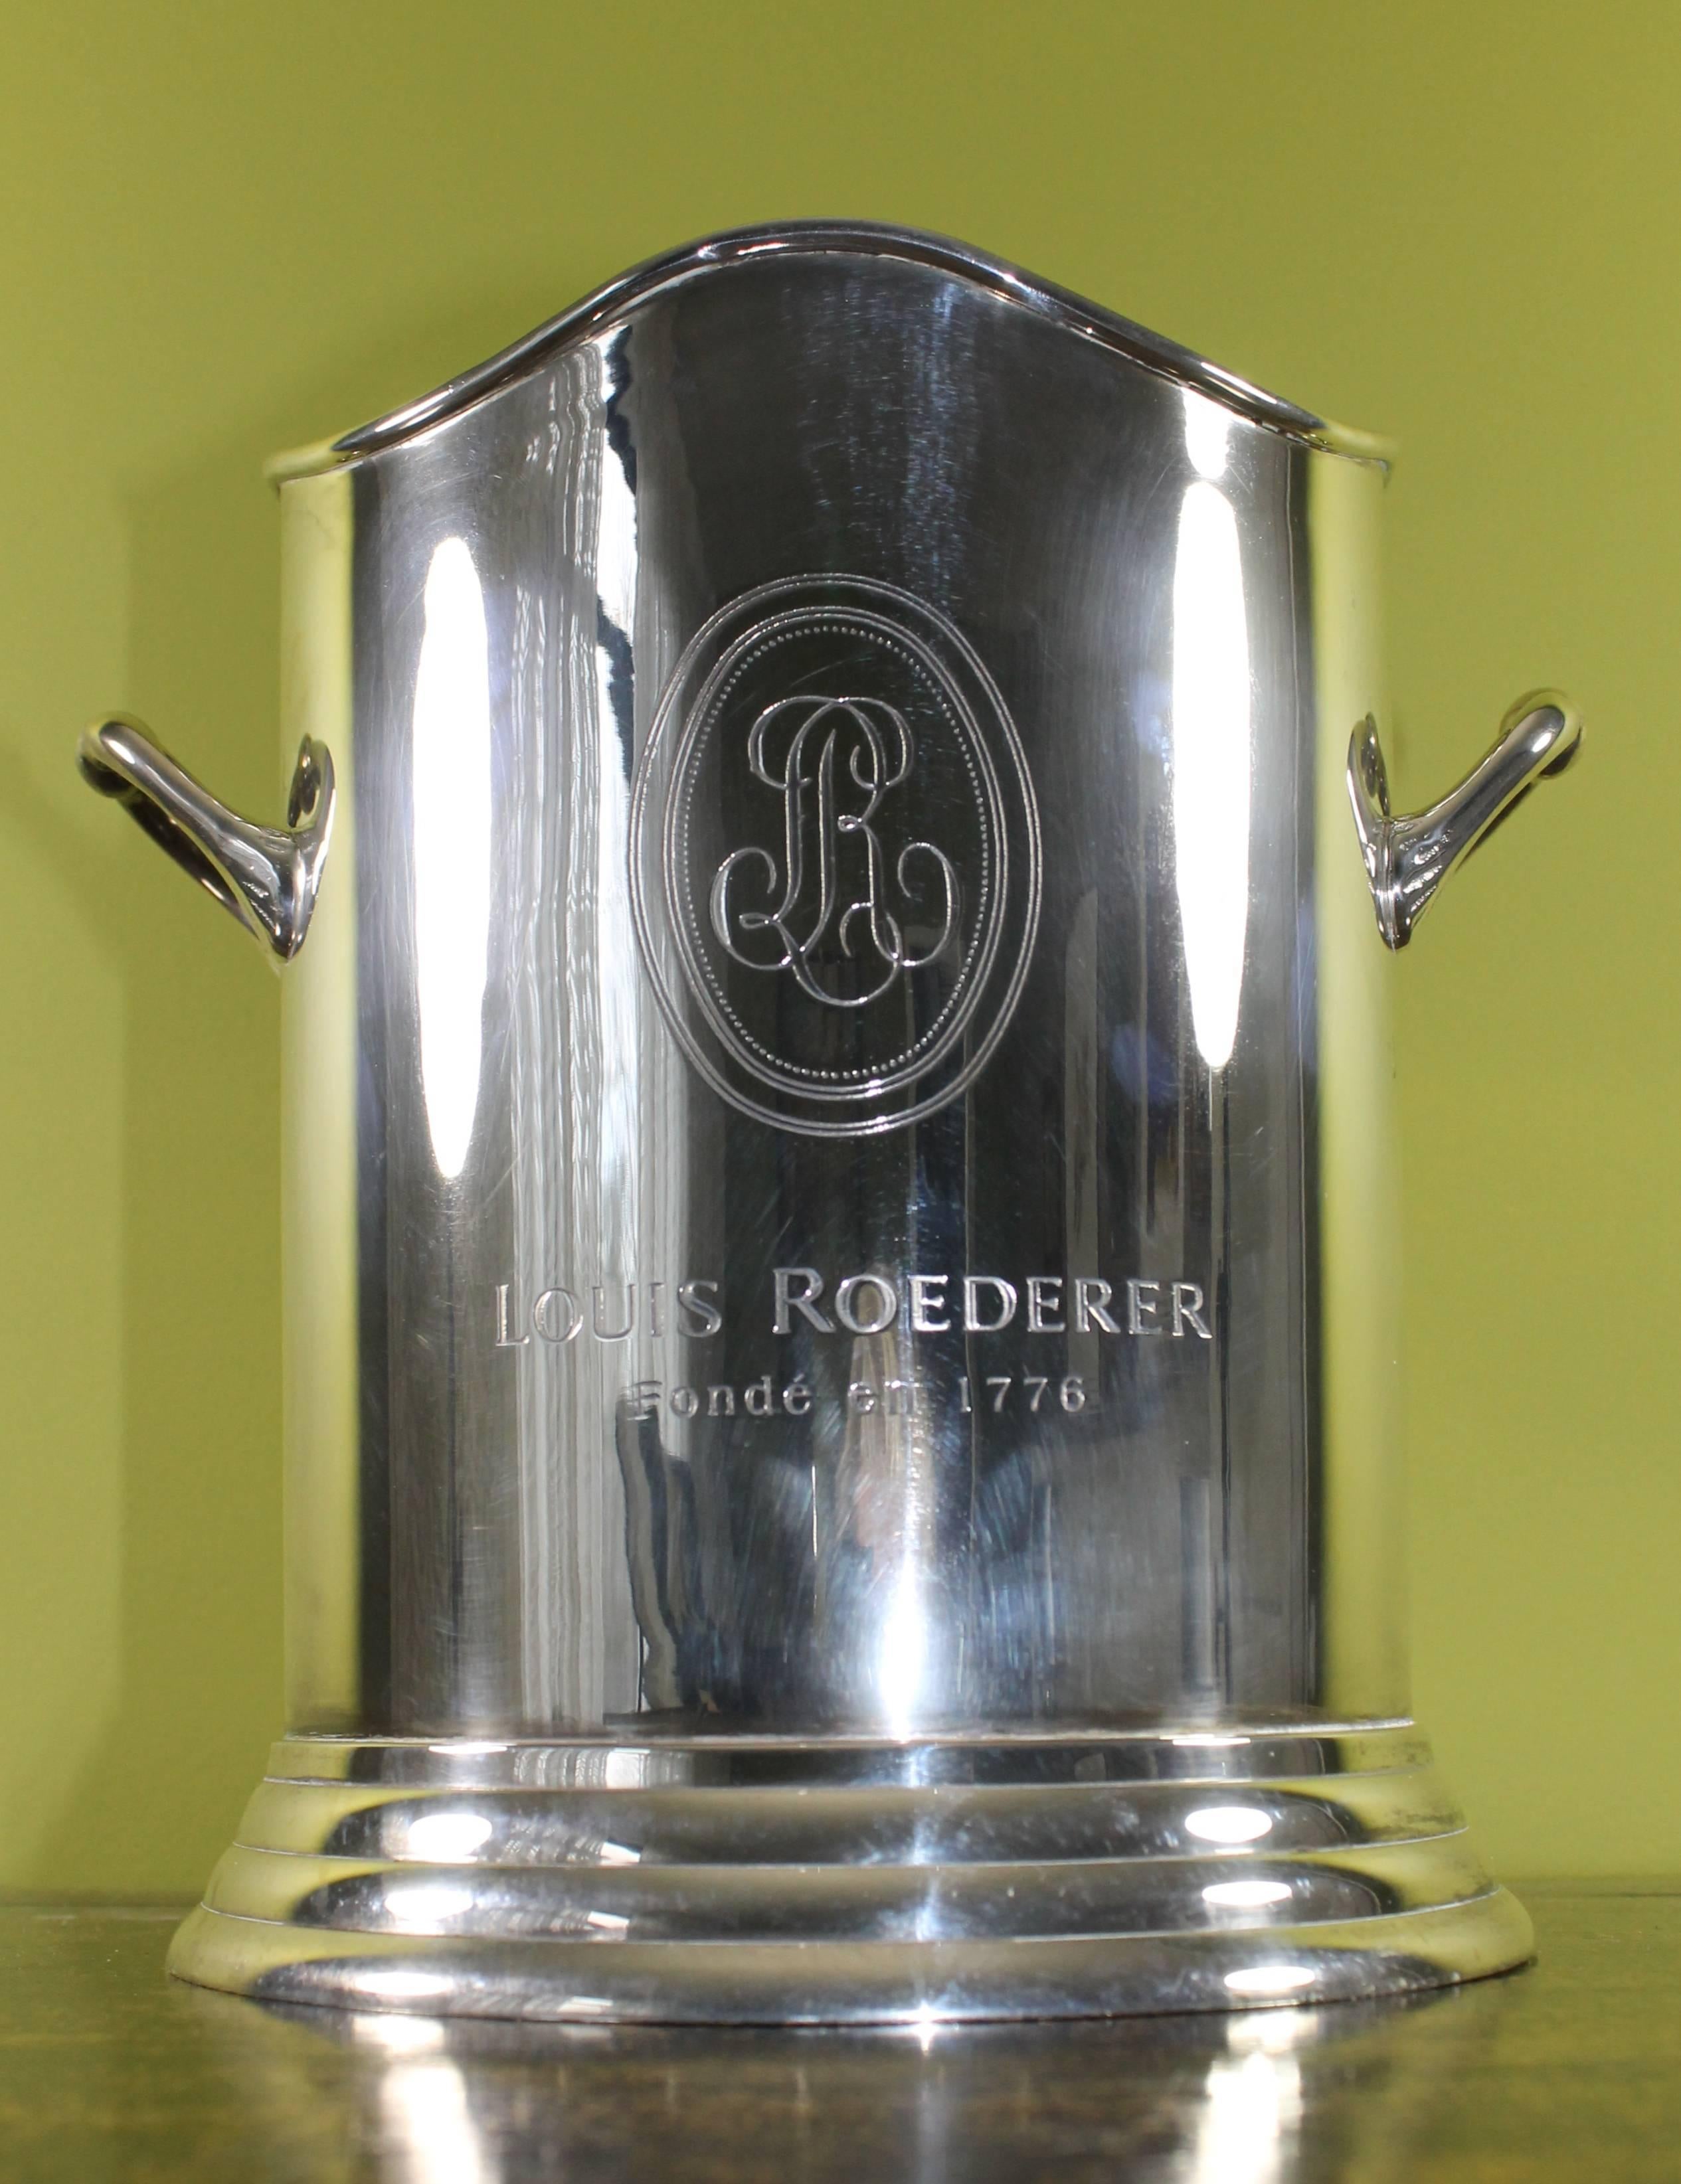  Cooler from the Famous Champagne House Louis Roederer 